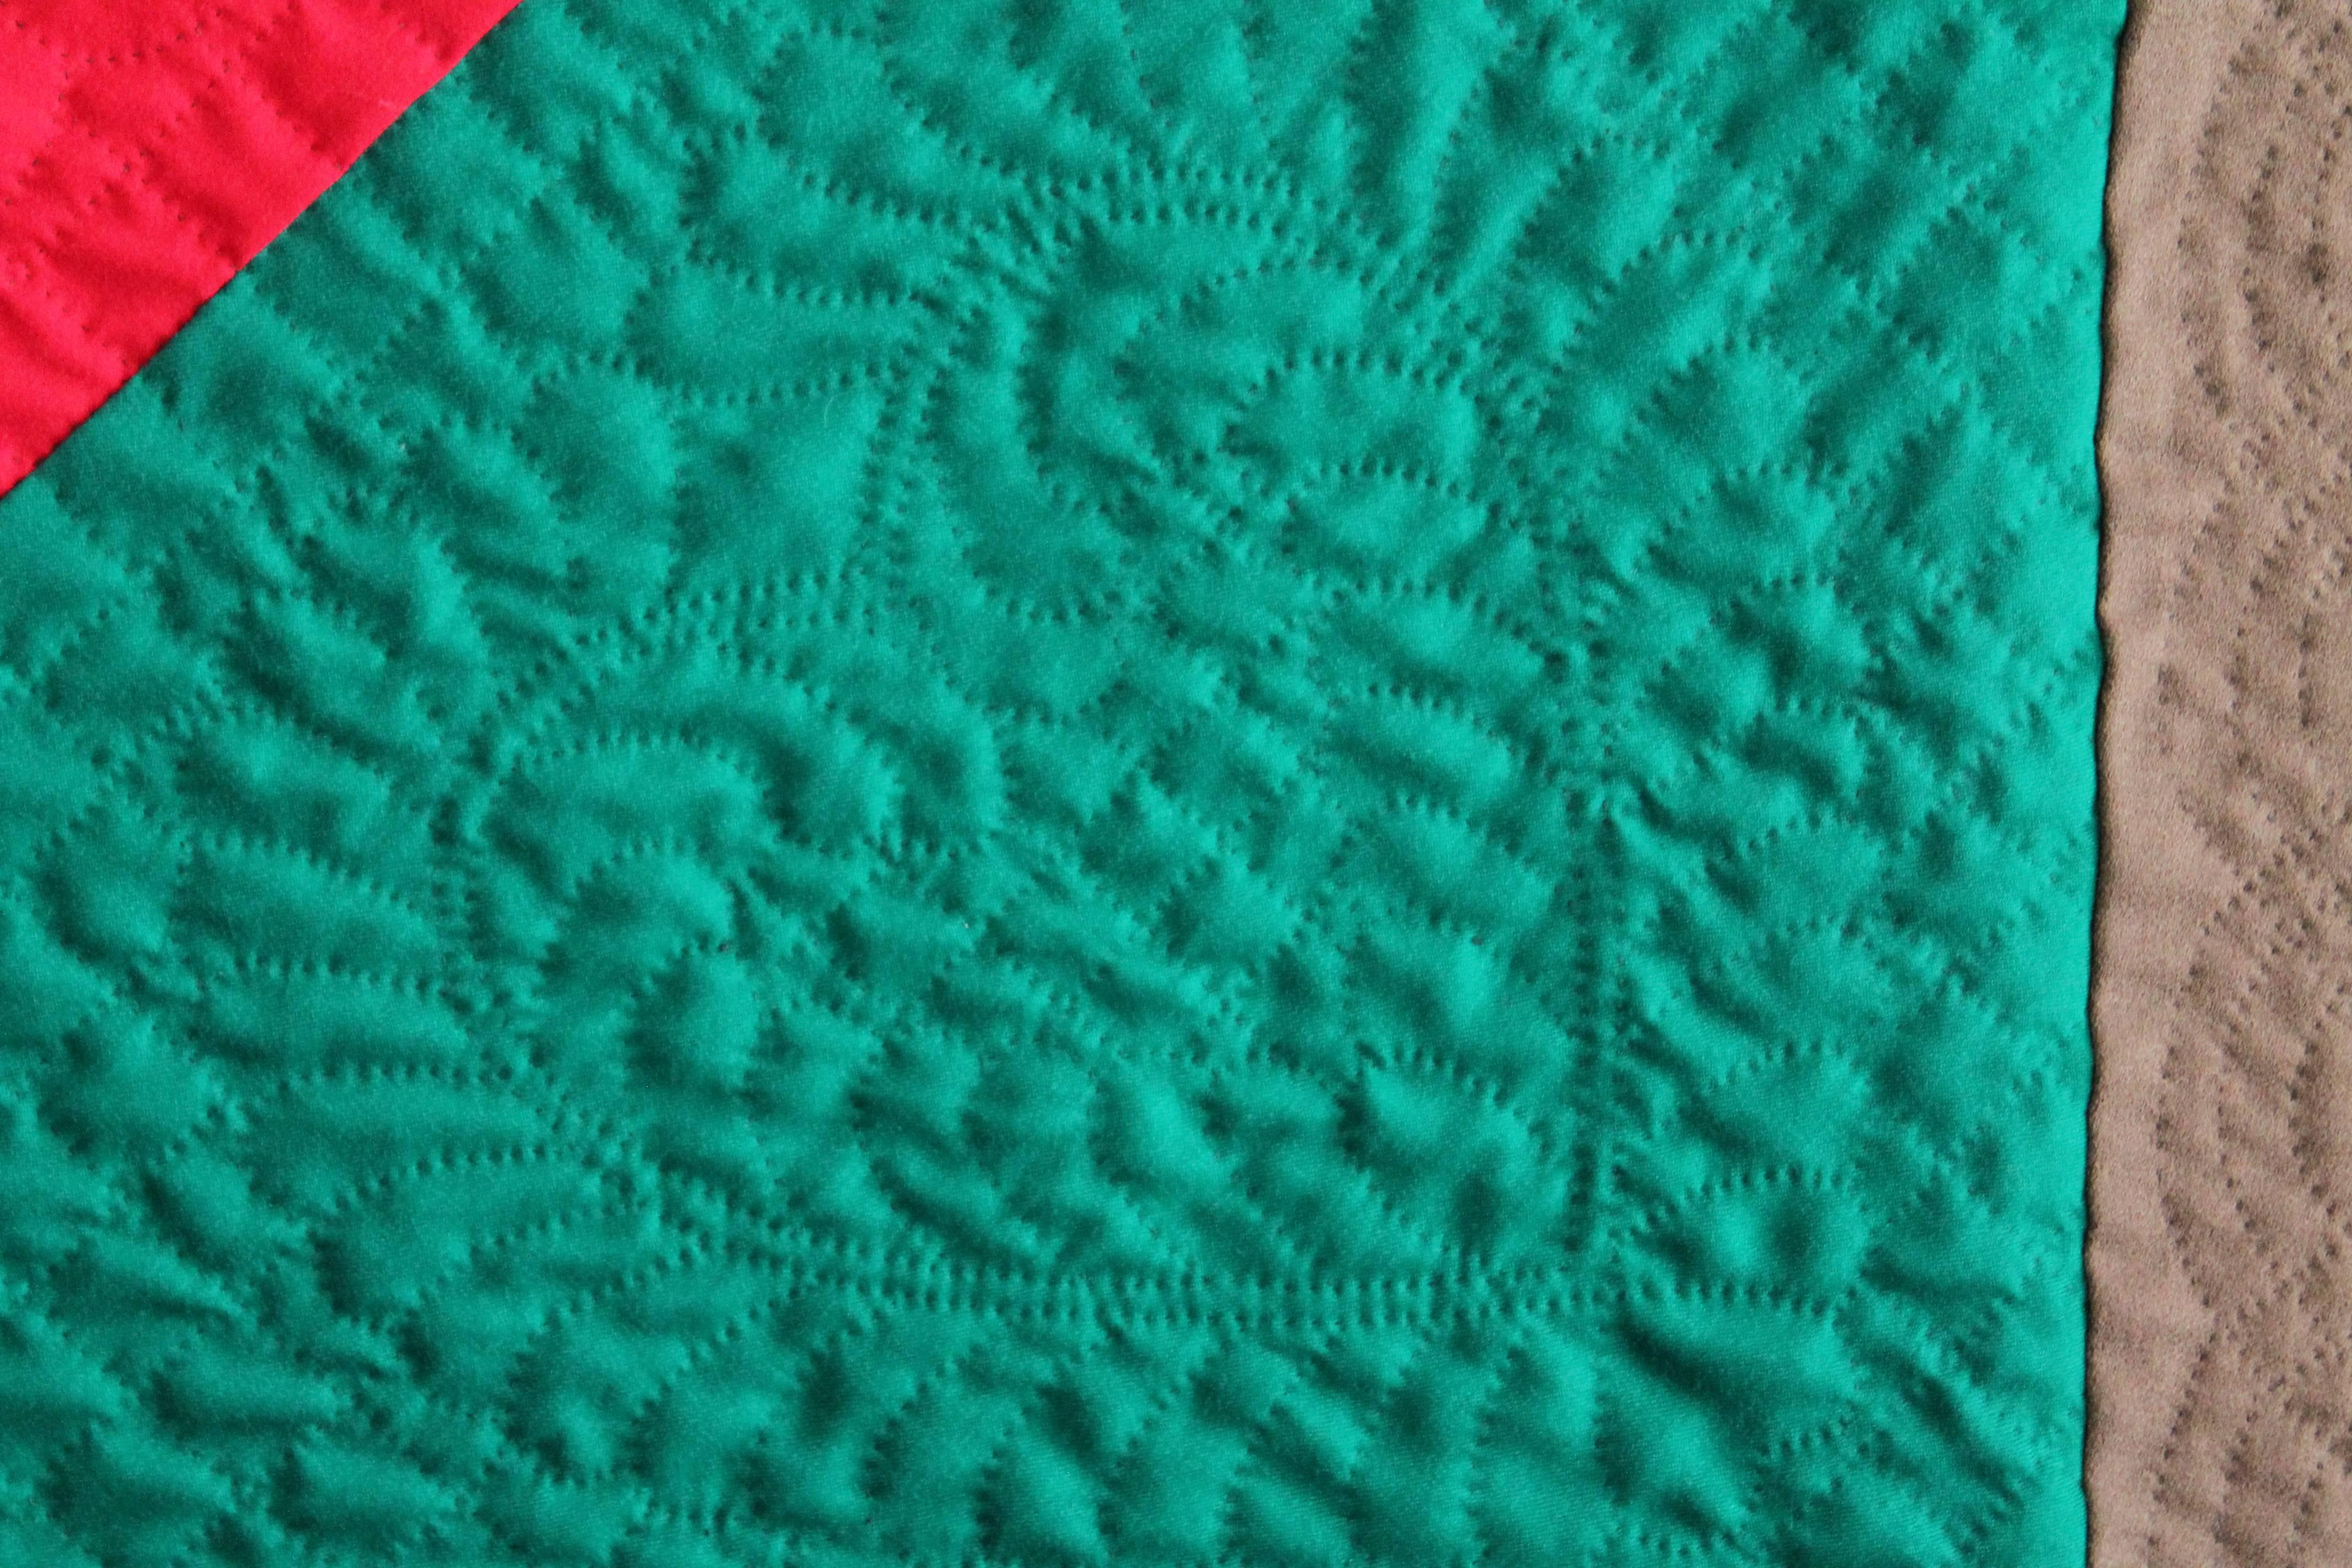 American Wool Quilt Diamond in a Square / Lancaster County, Pennsylvania